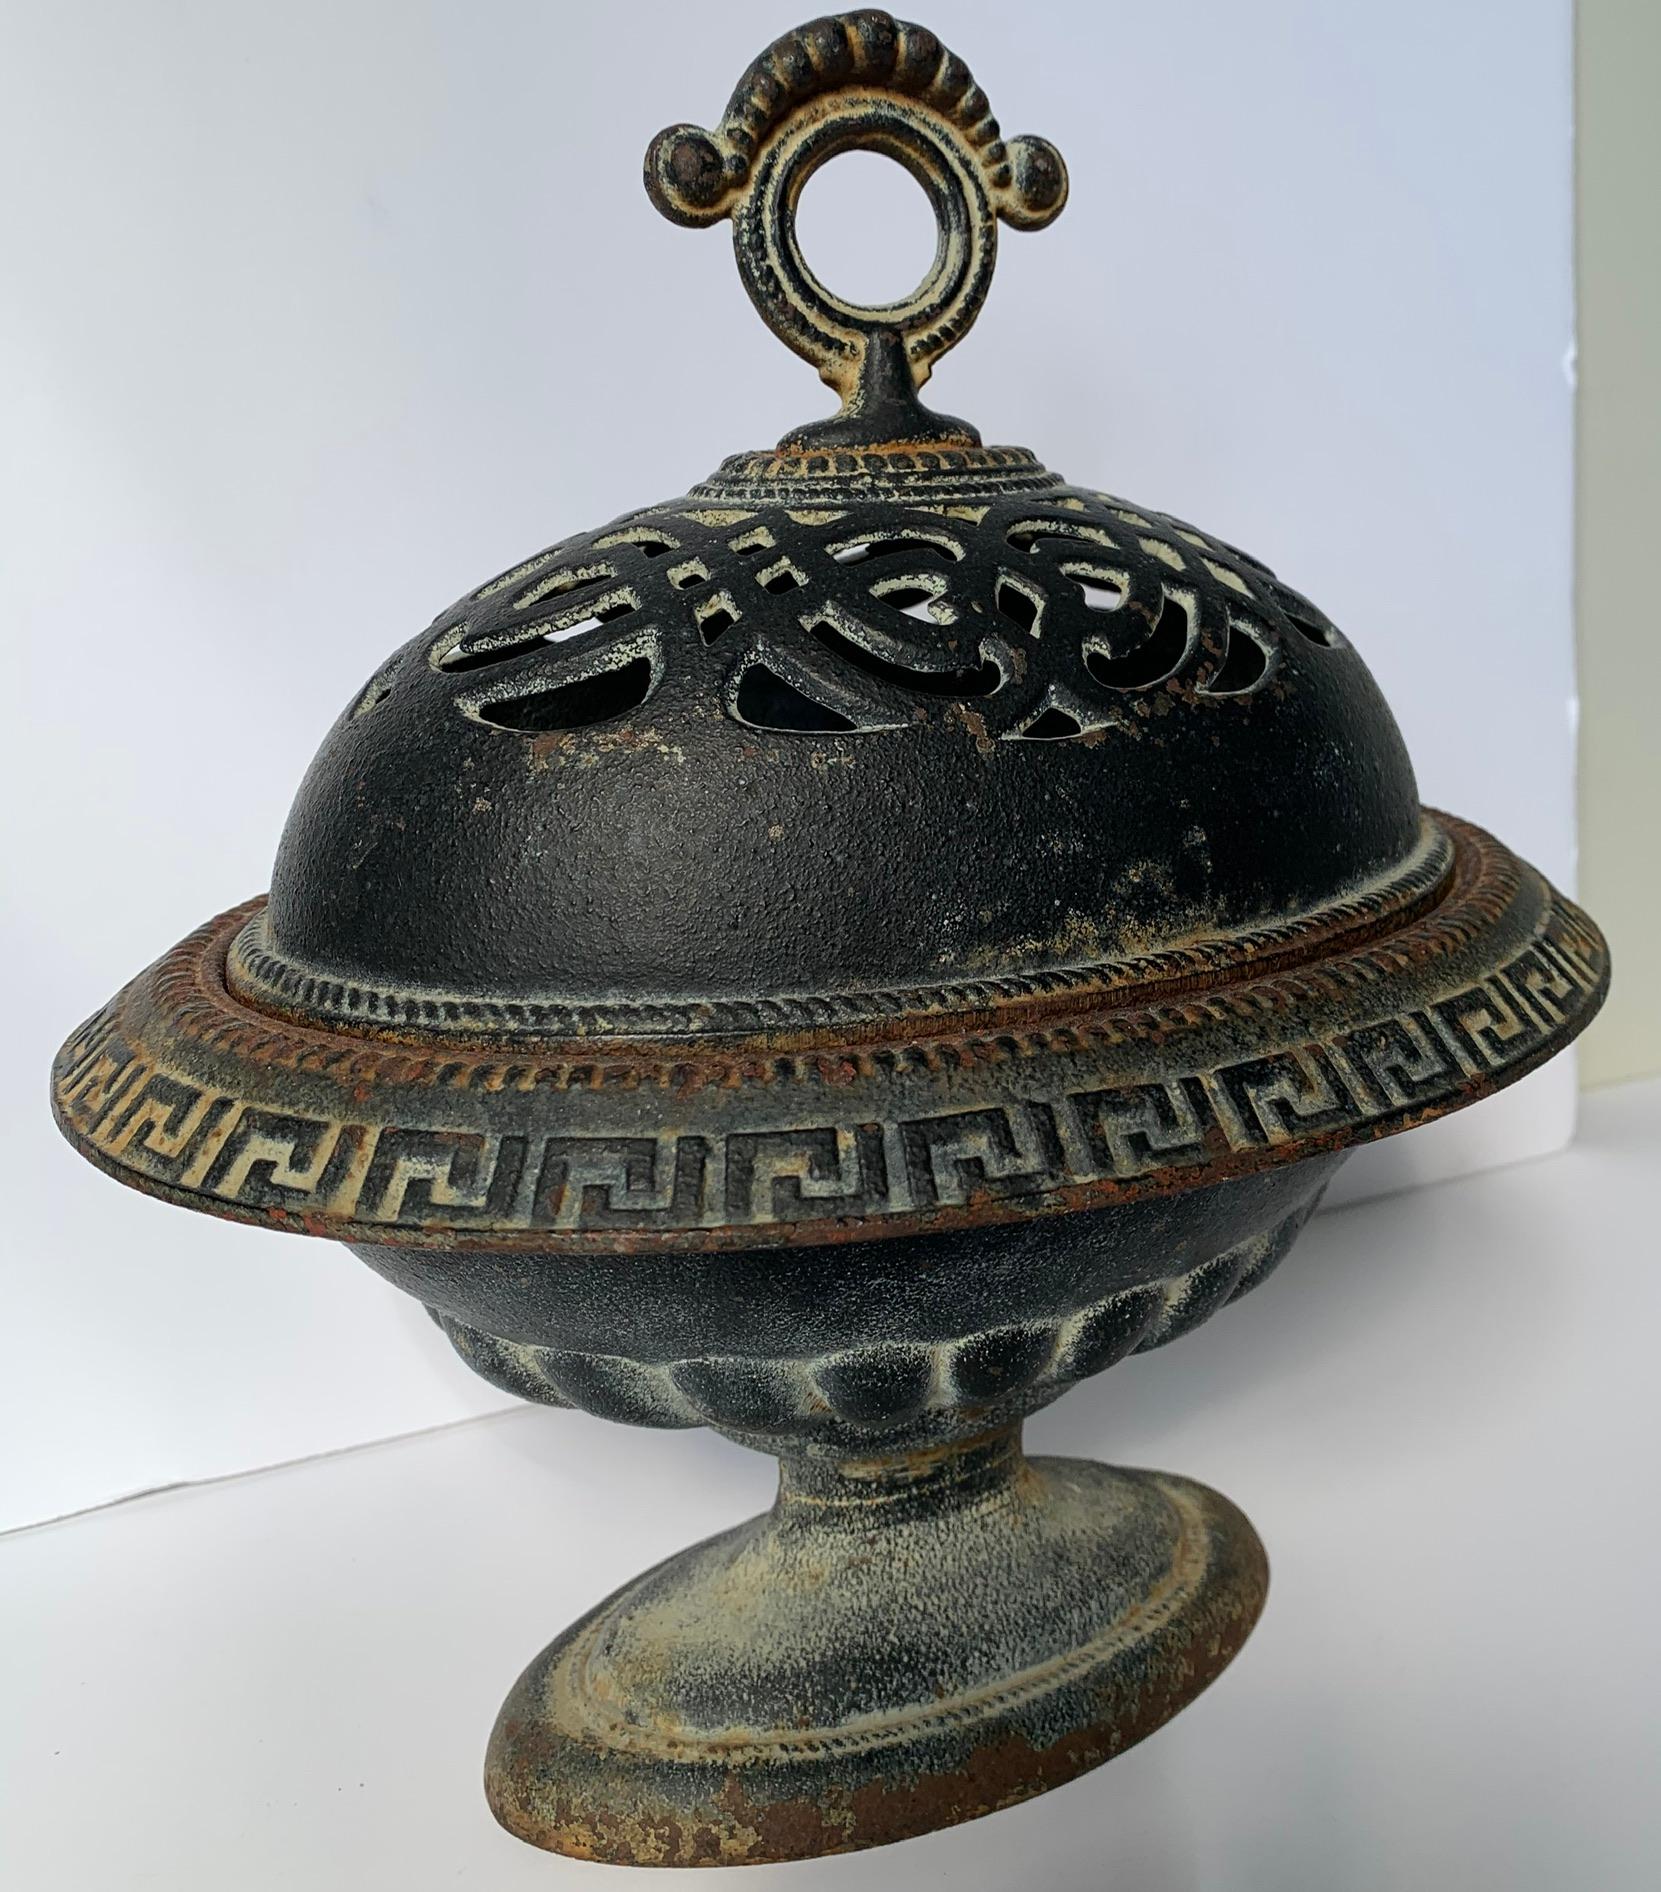 Antique black cast iron urn or cache pot. Greek key detailing and pierced openwork top. Would work well for porporri or flowers. No makers mark. Suitable for indoor or outdoor use.